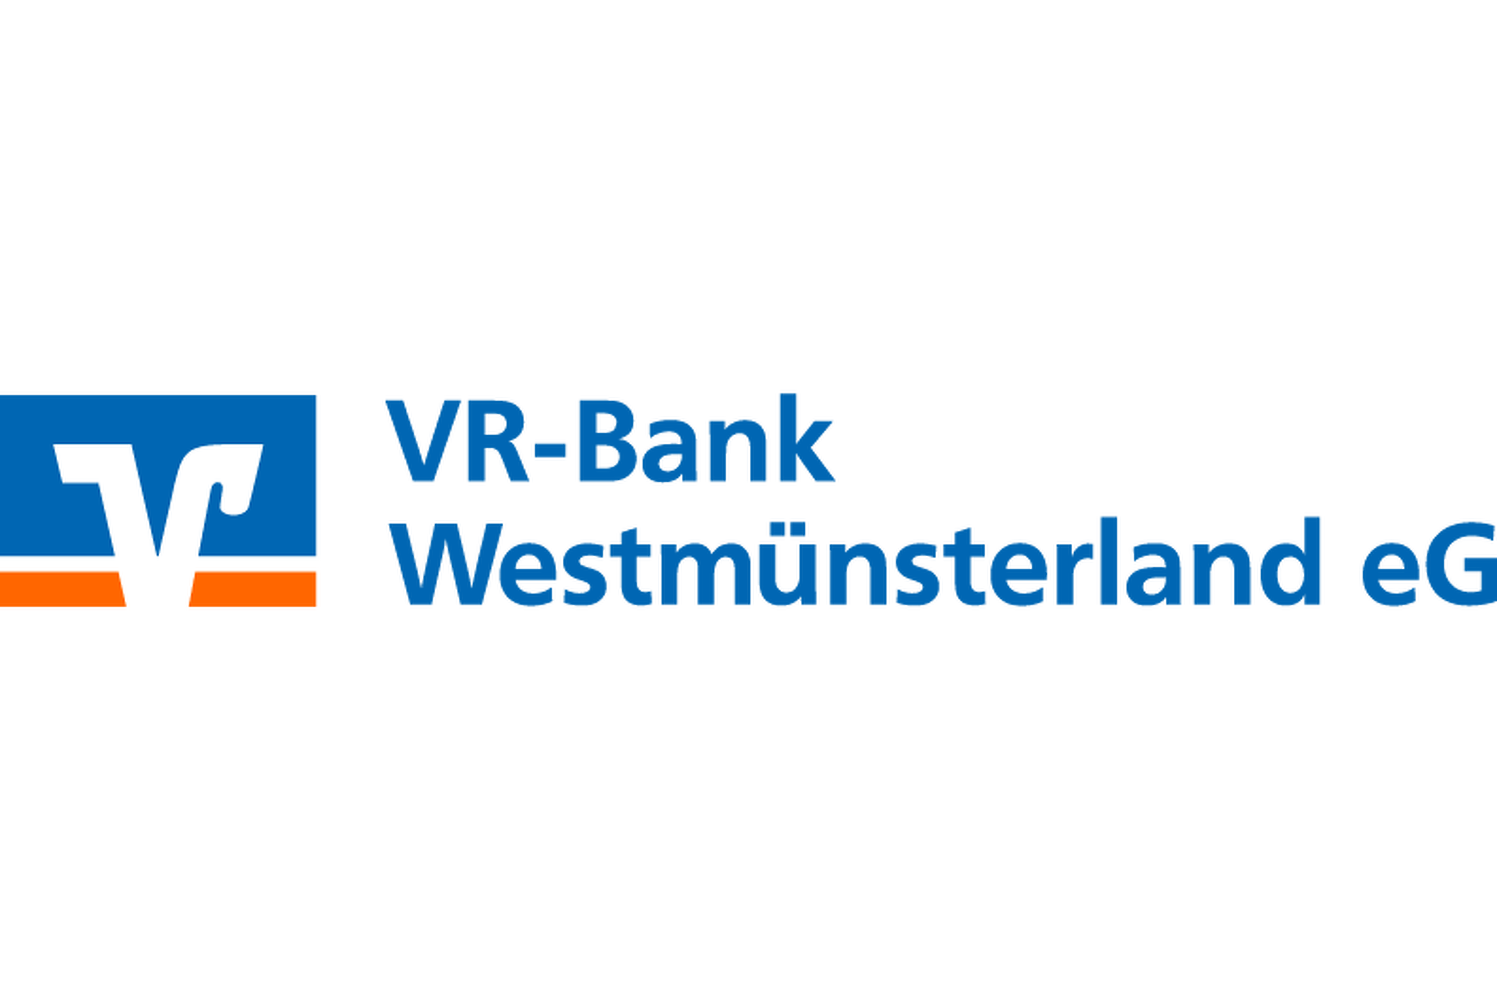 wk vr bank w